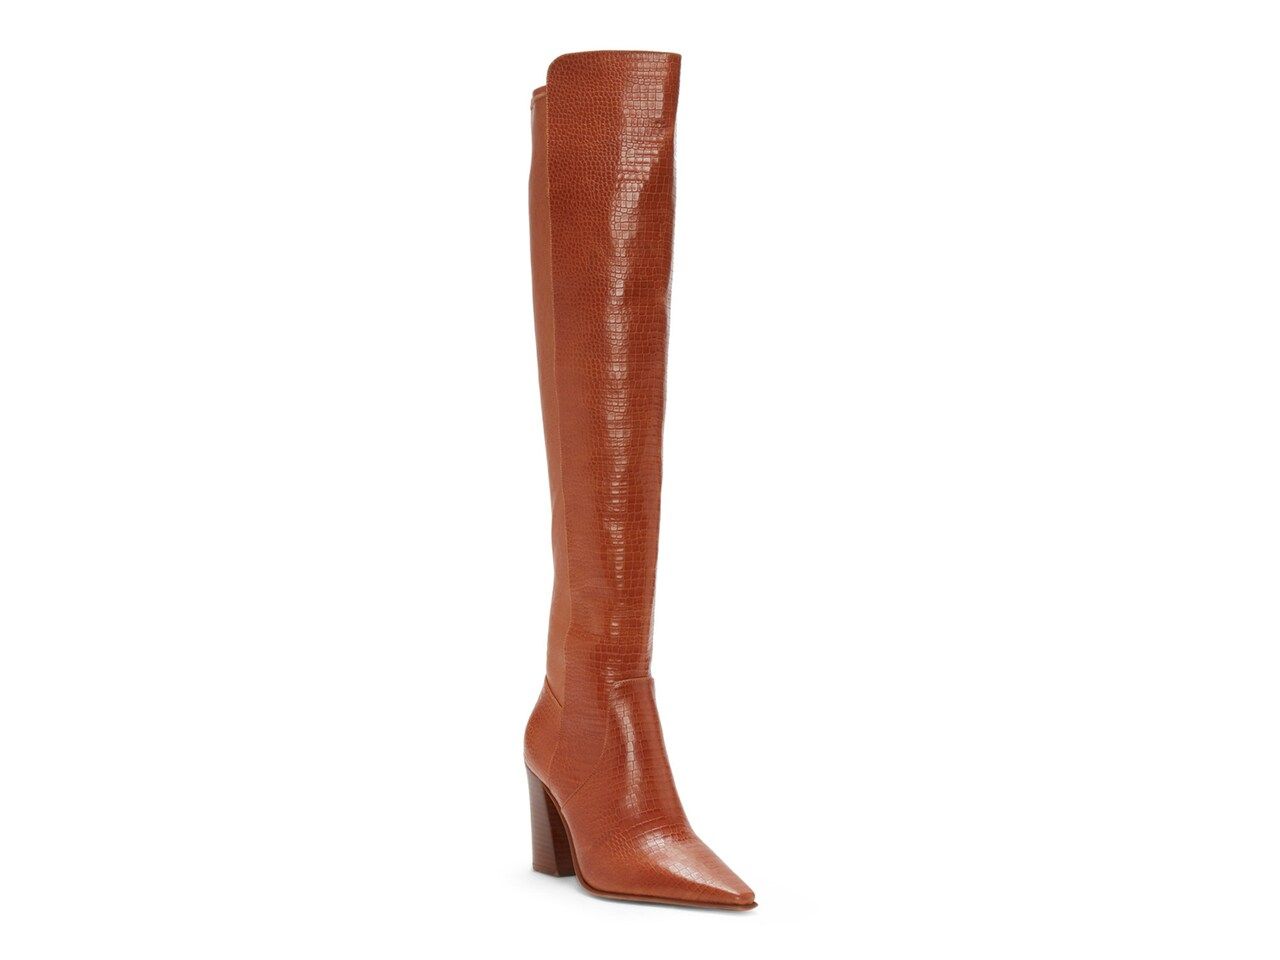 Vince Camuto Demerri Over The Knee Boot | DSW